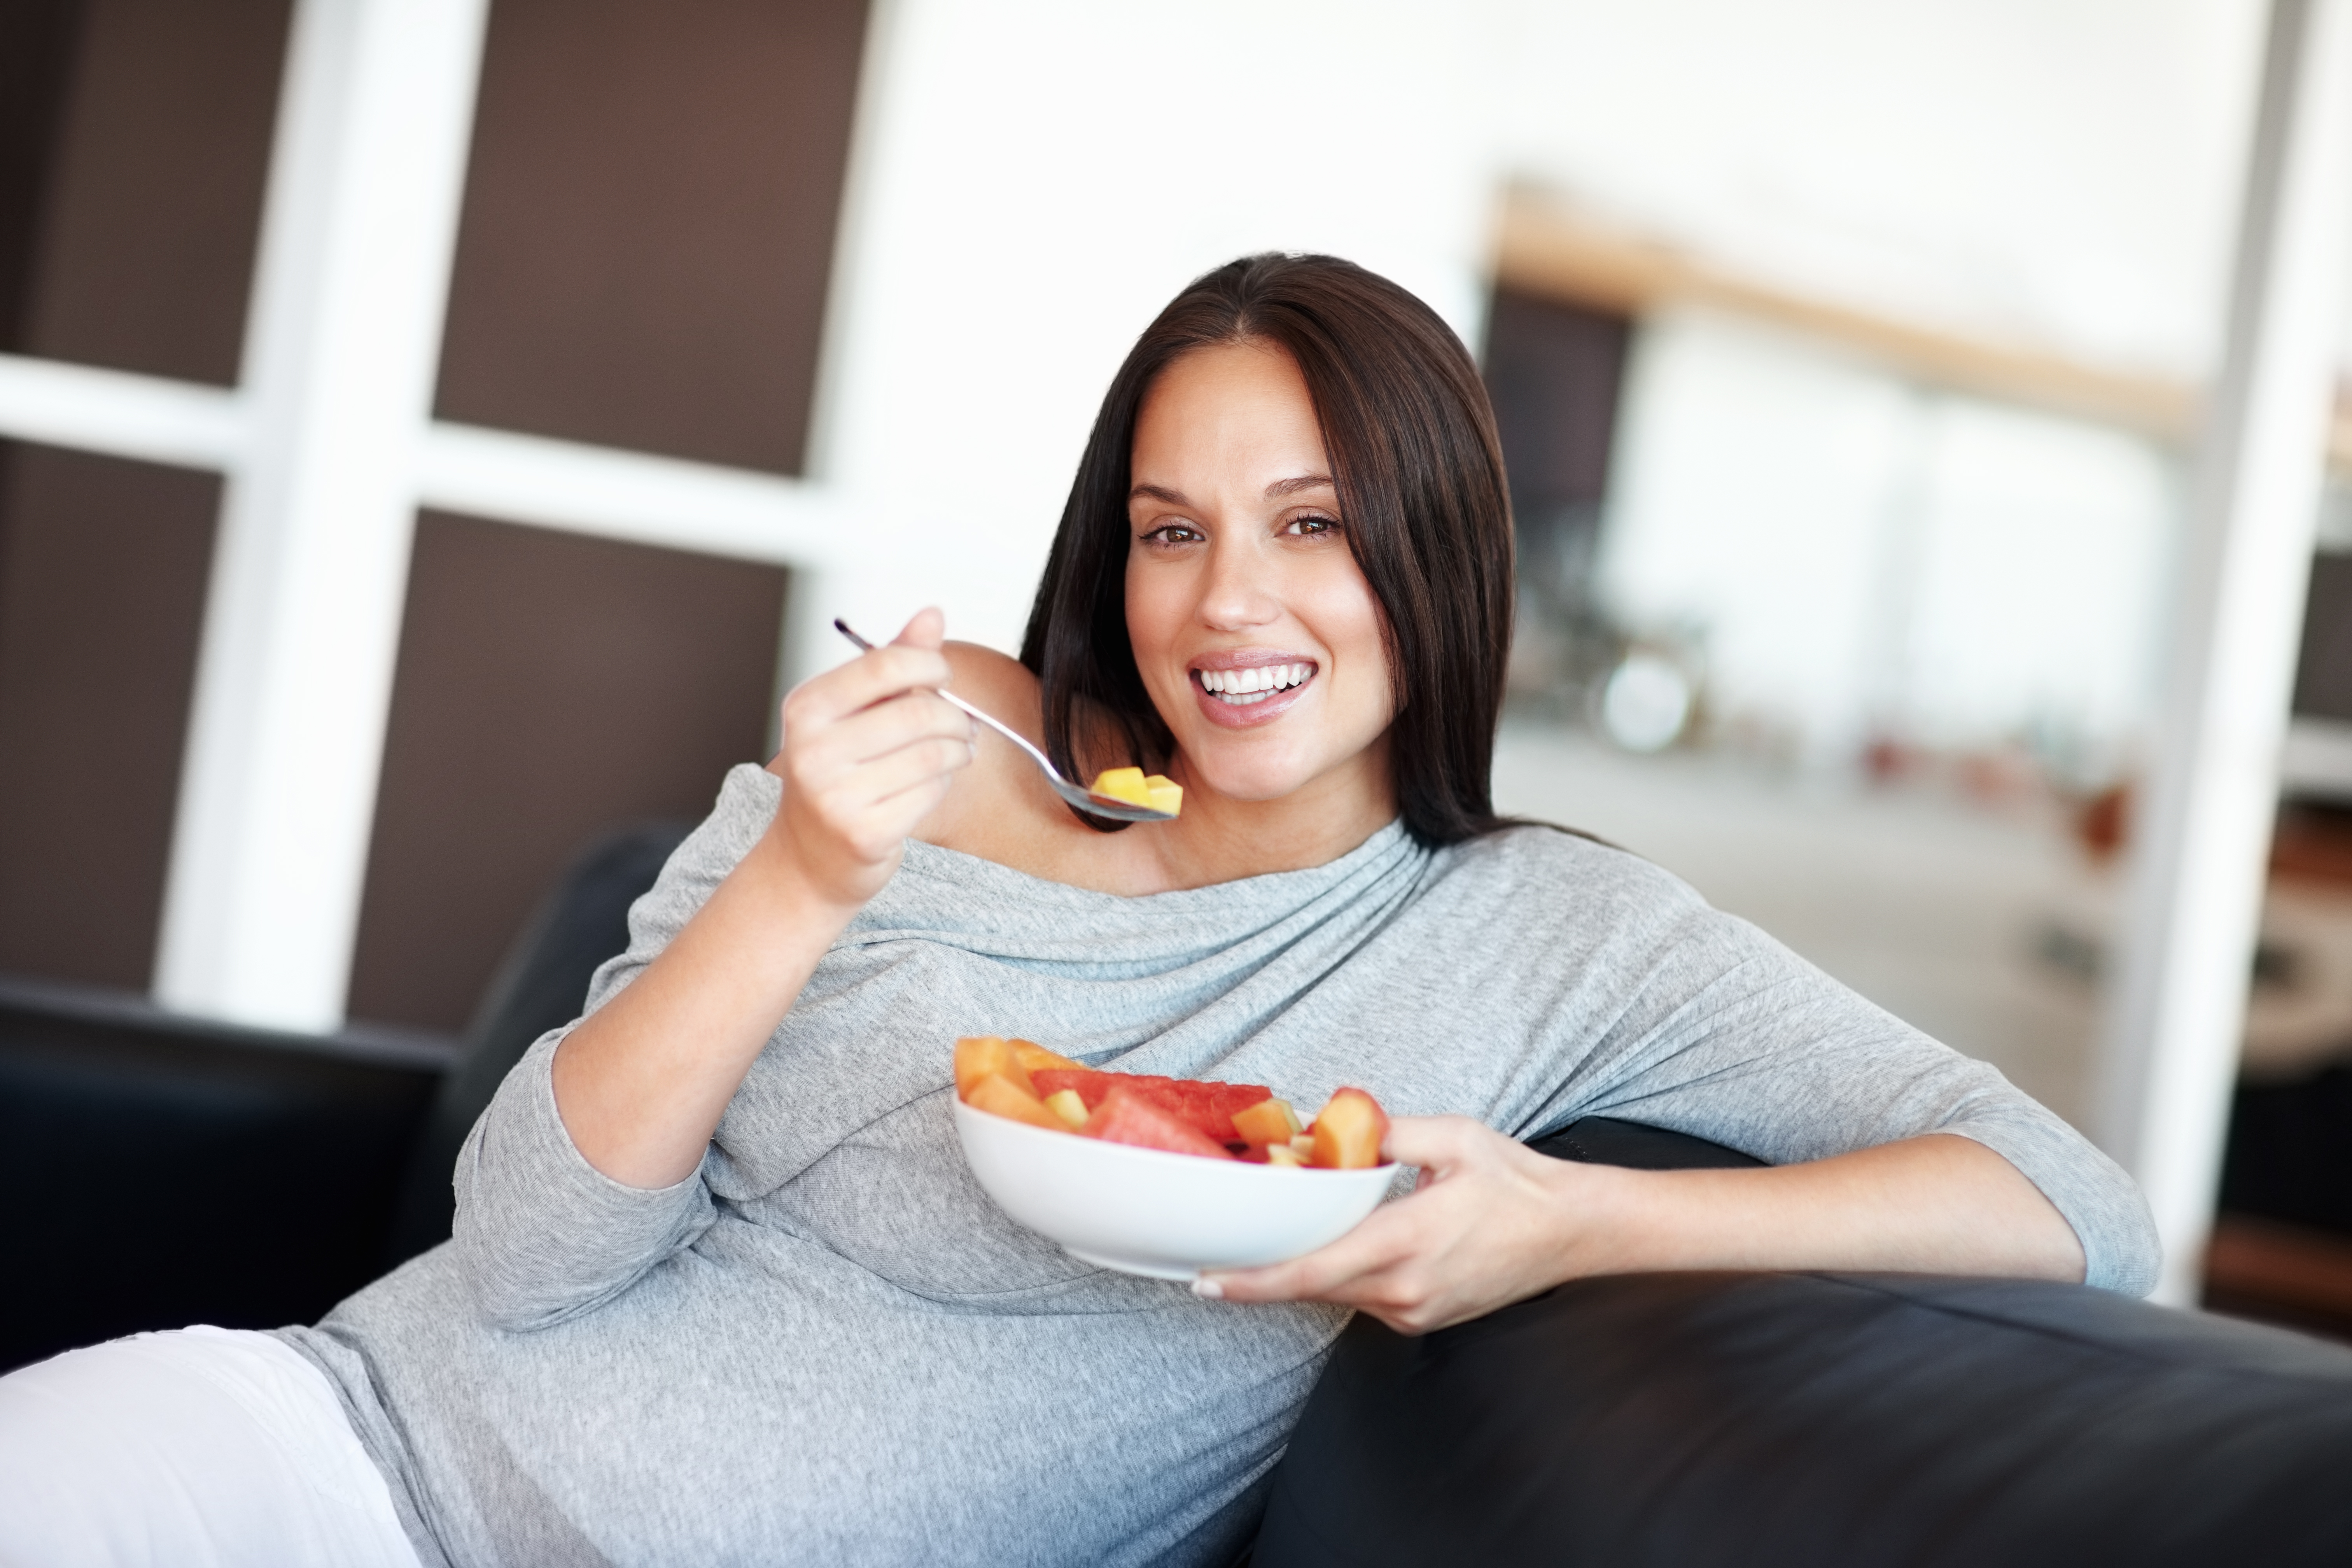 Pregnant woman eating a healthy fruit snack